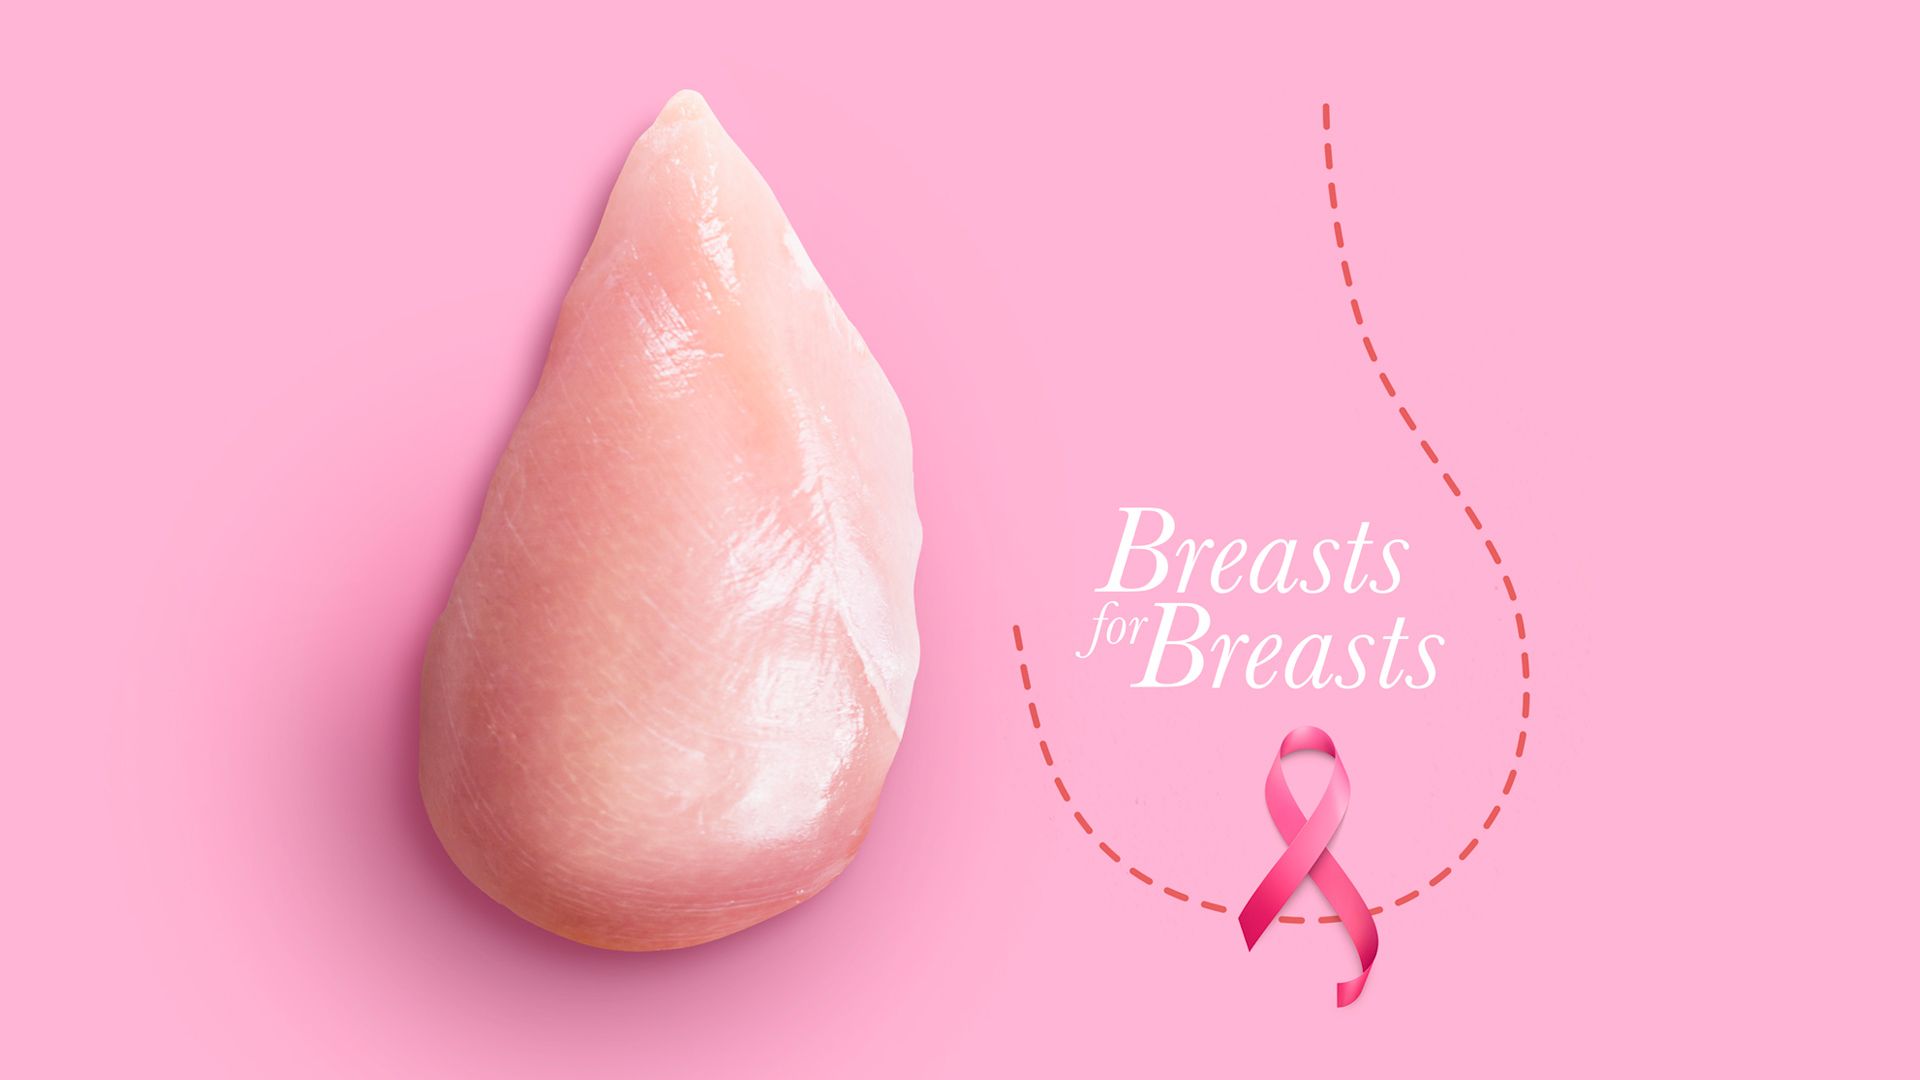 Case study: Kenchic Breast for Breast